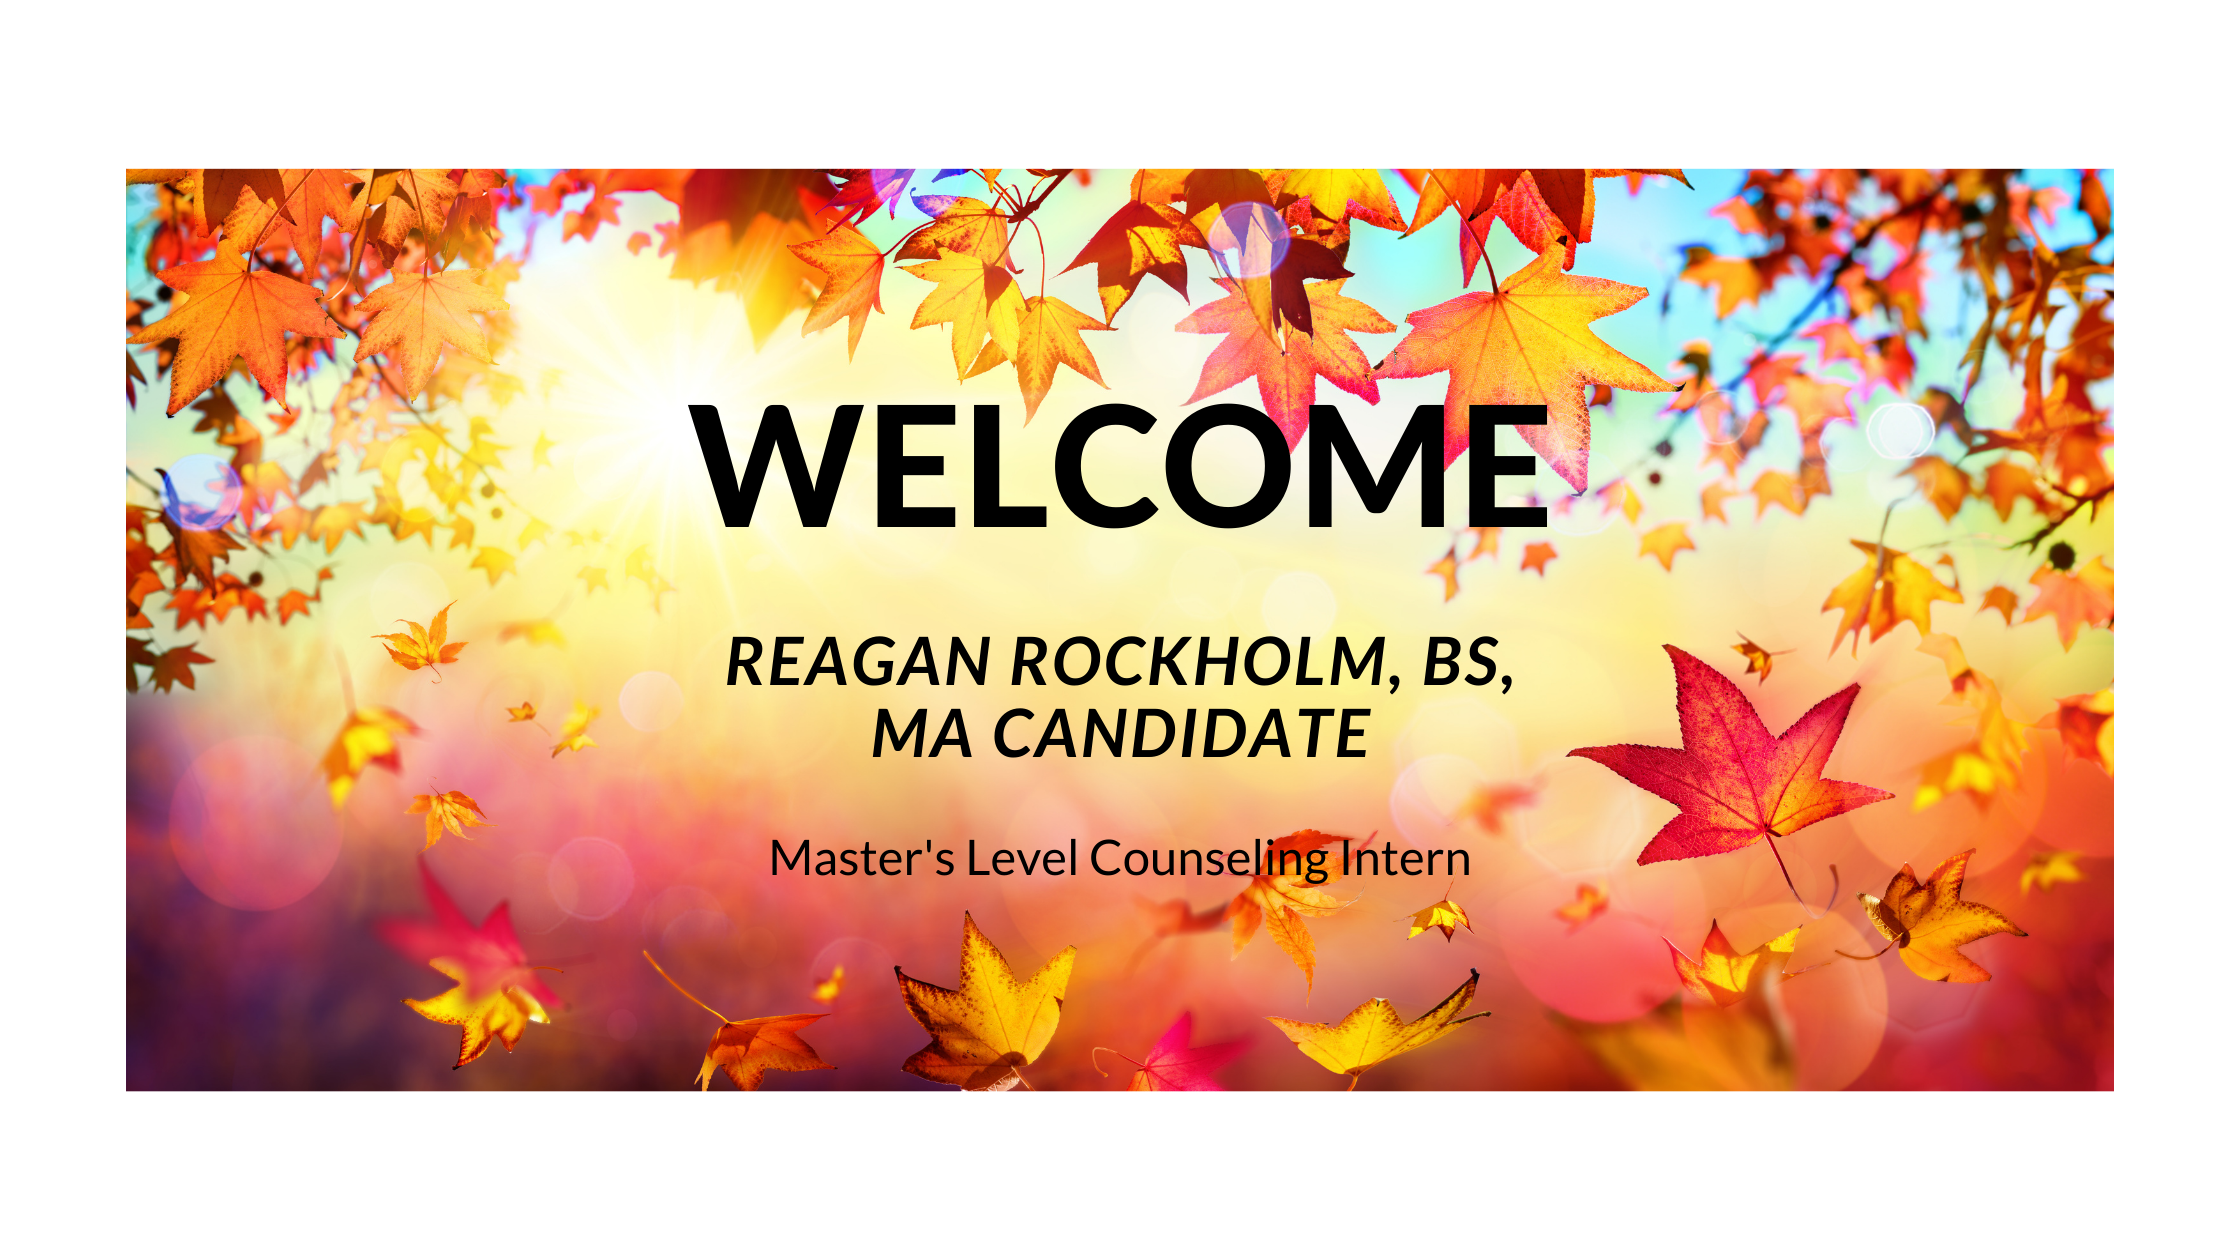 We’re Ecstatic to Welcome Reagan to the Team!